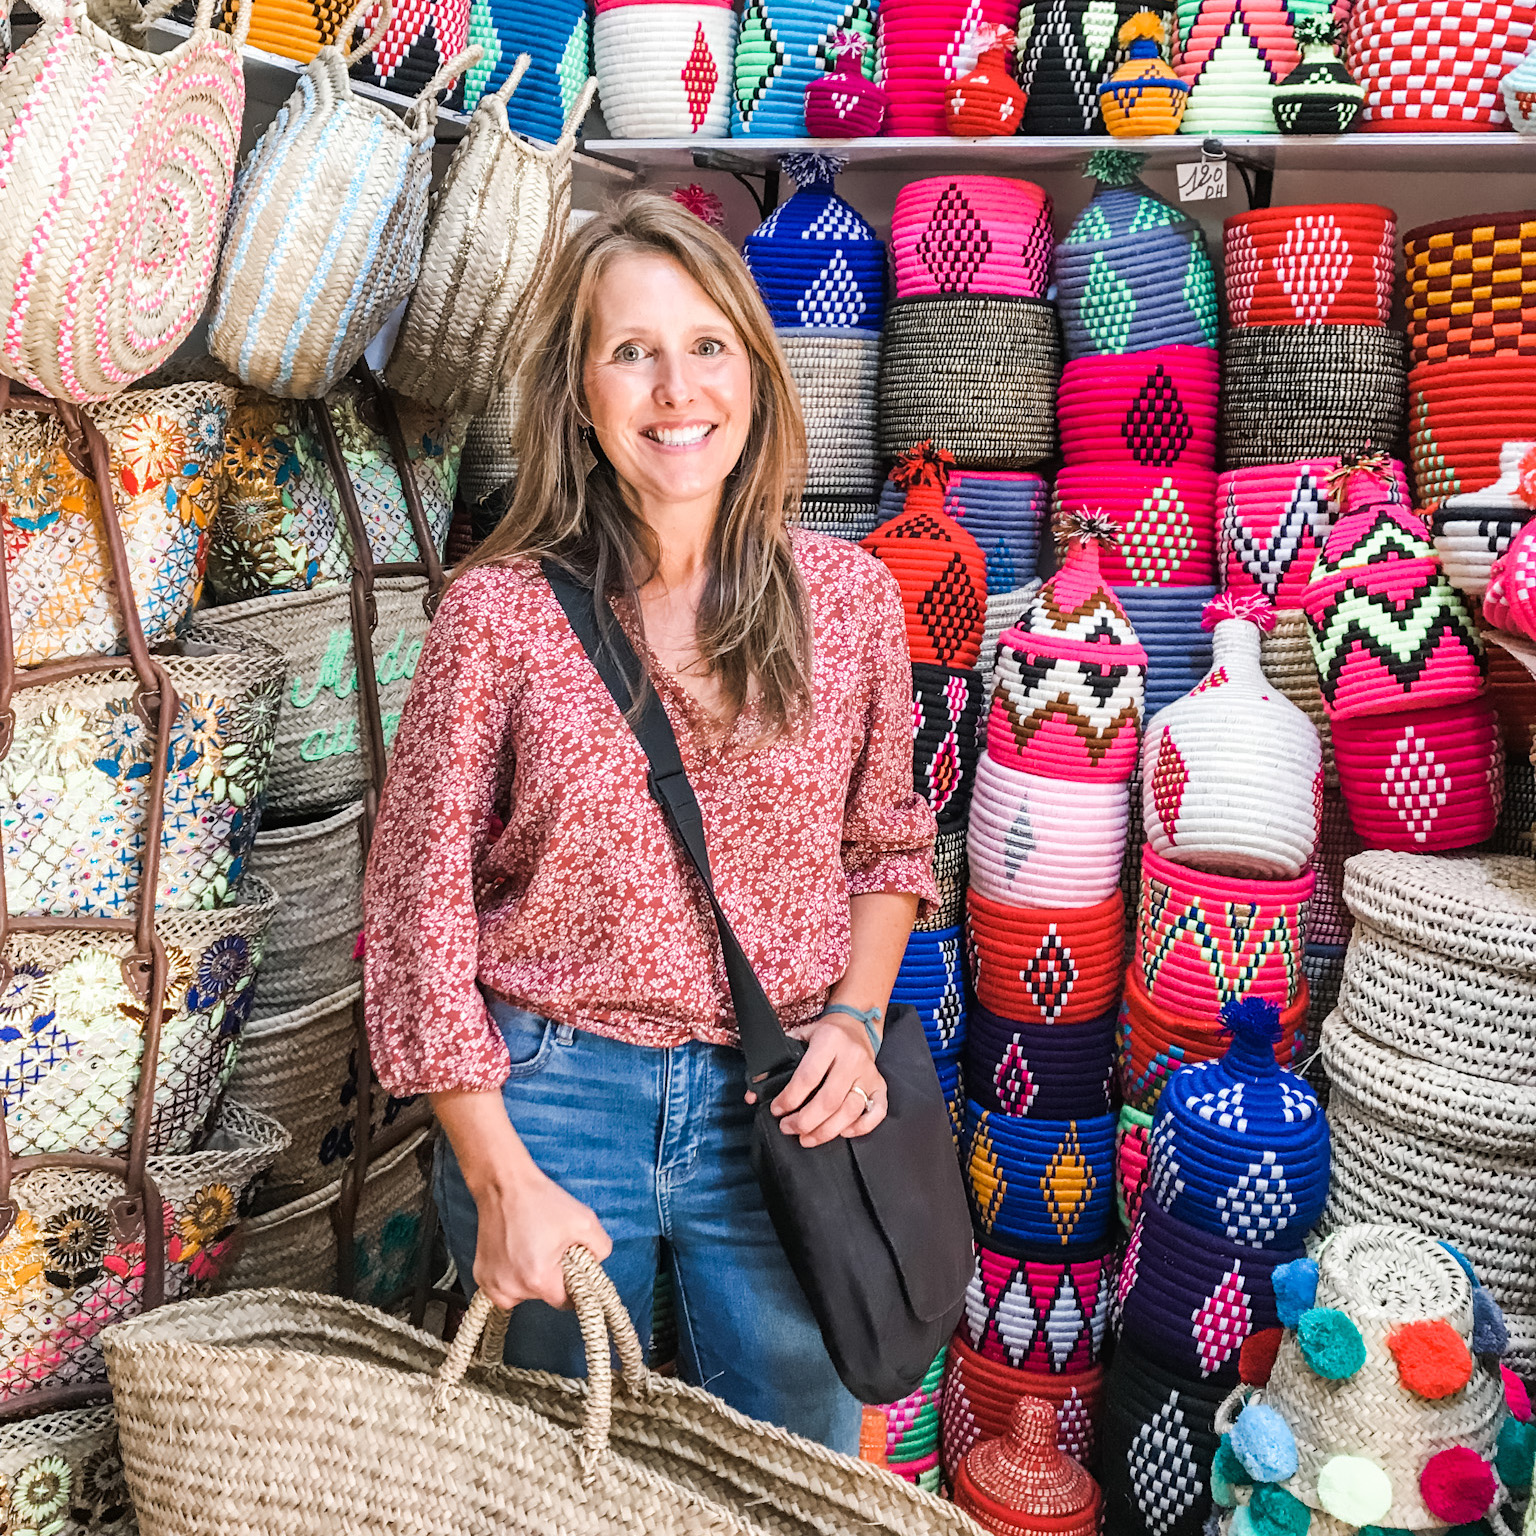 Photo of Stacey Edgar holding a basket in an artisan shop